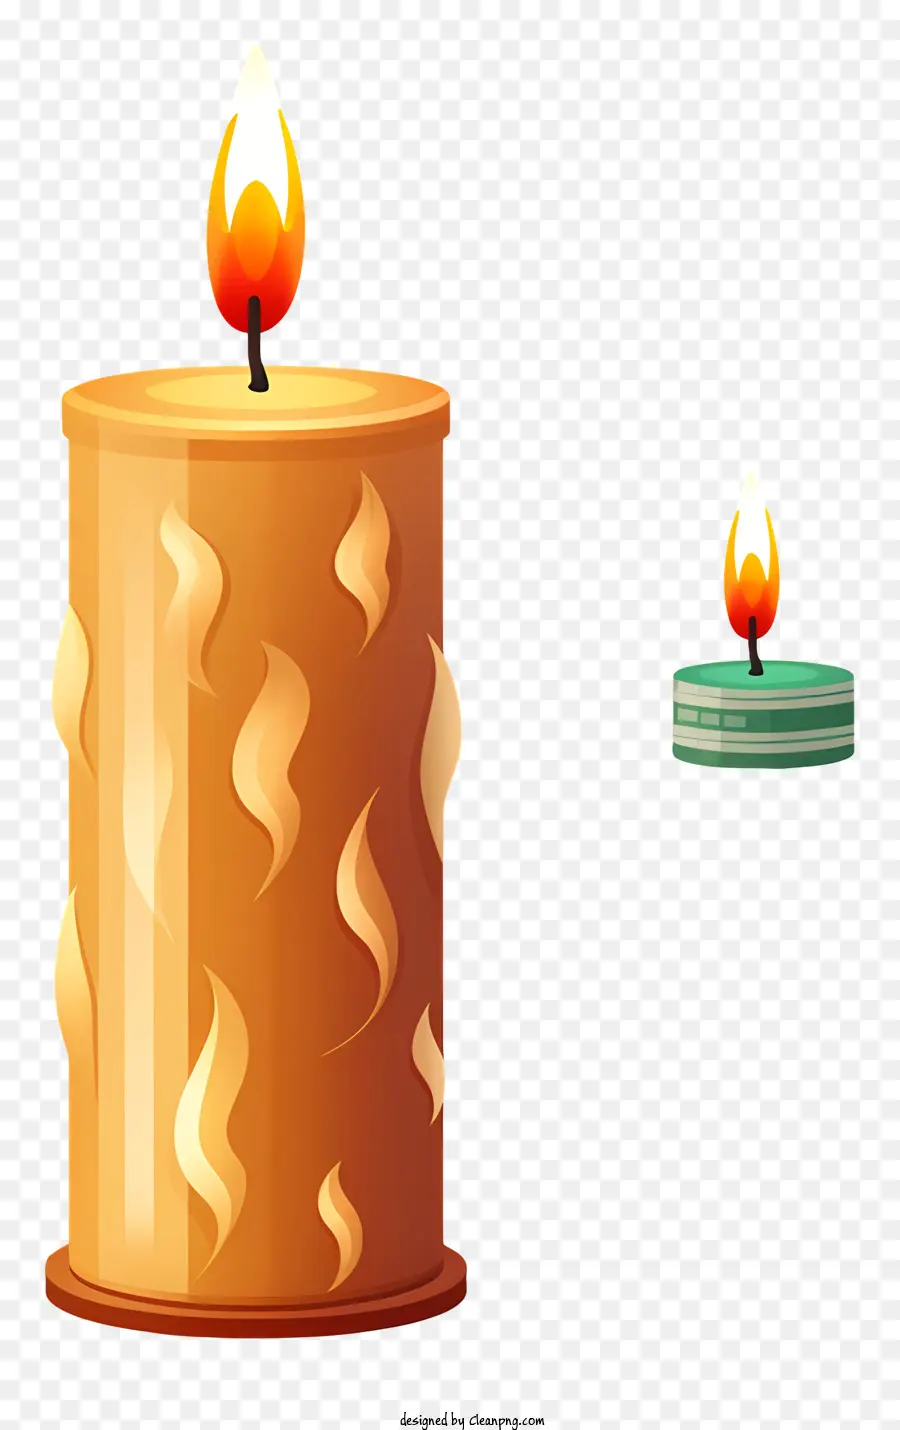 lit candle flickering flames wooden candle warm yellow hue cool orange flames